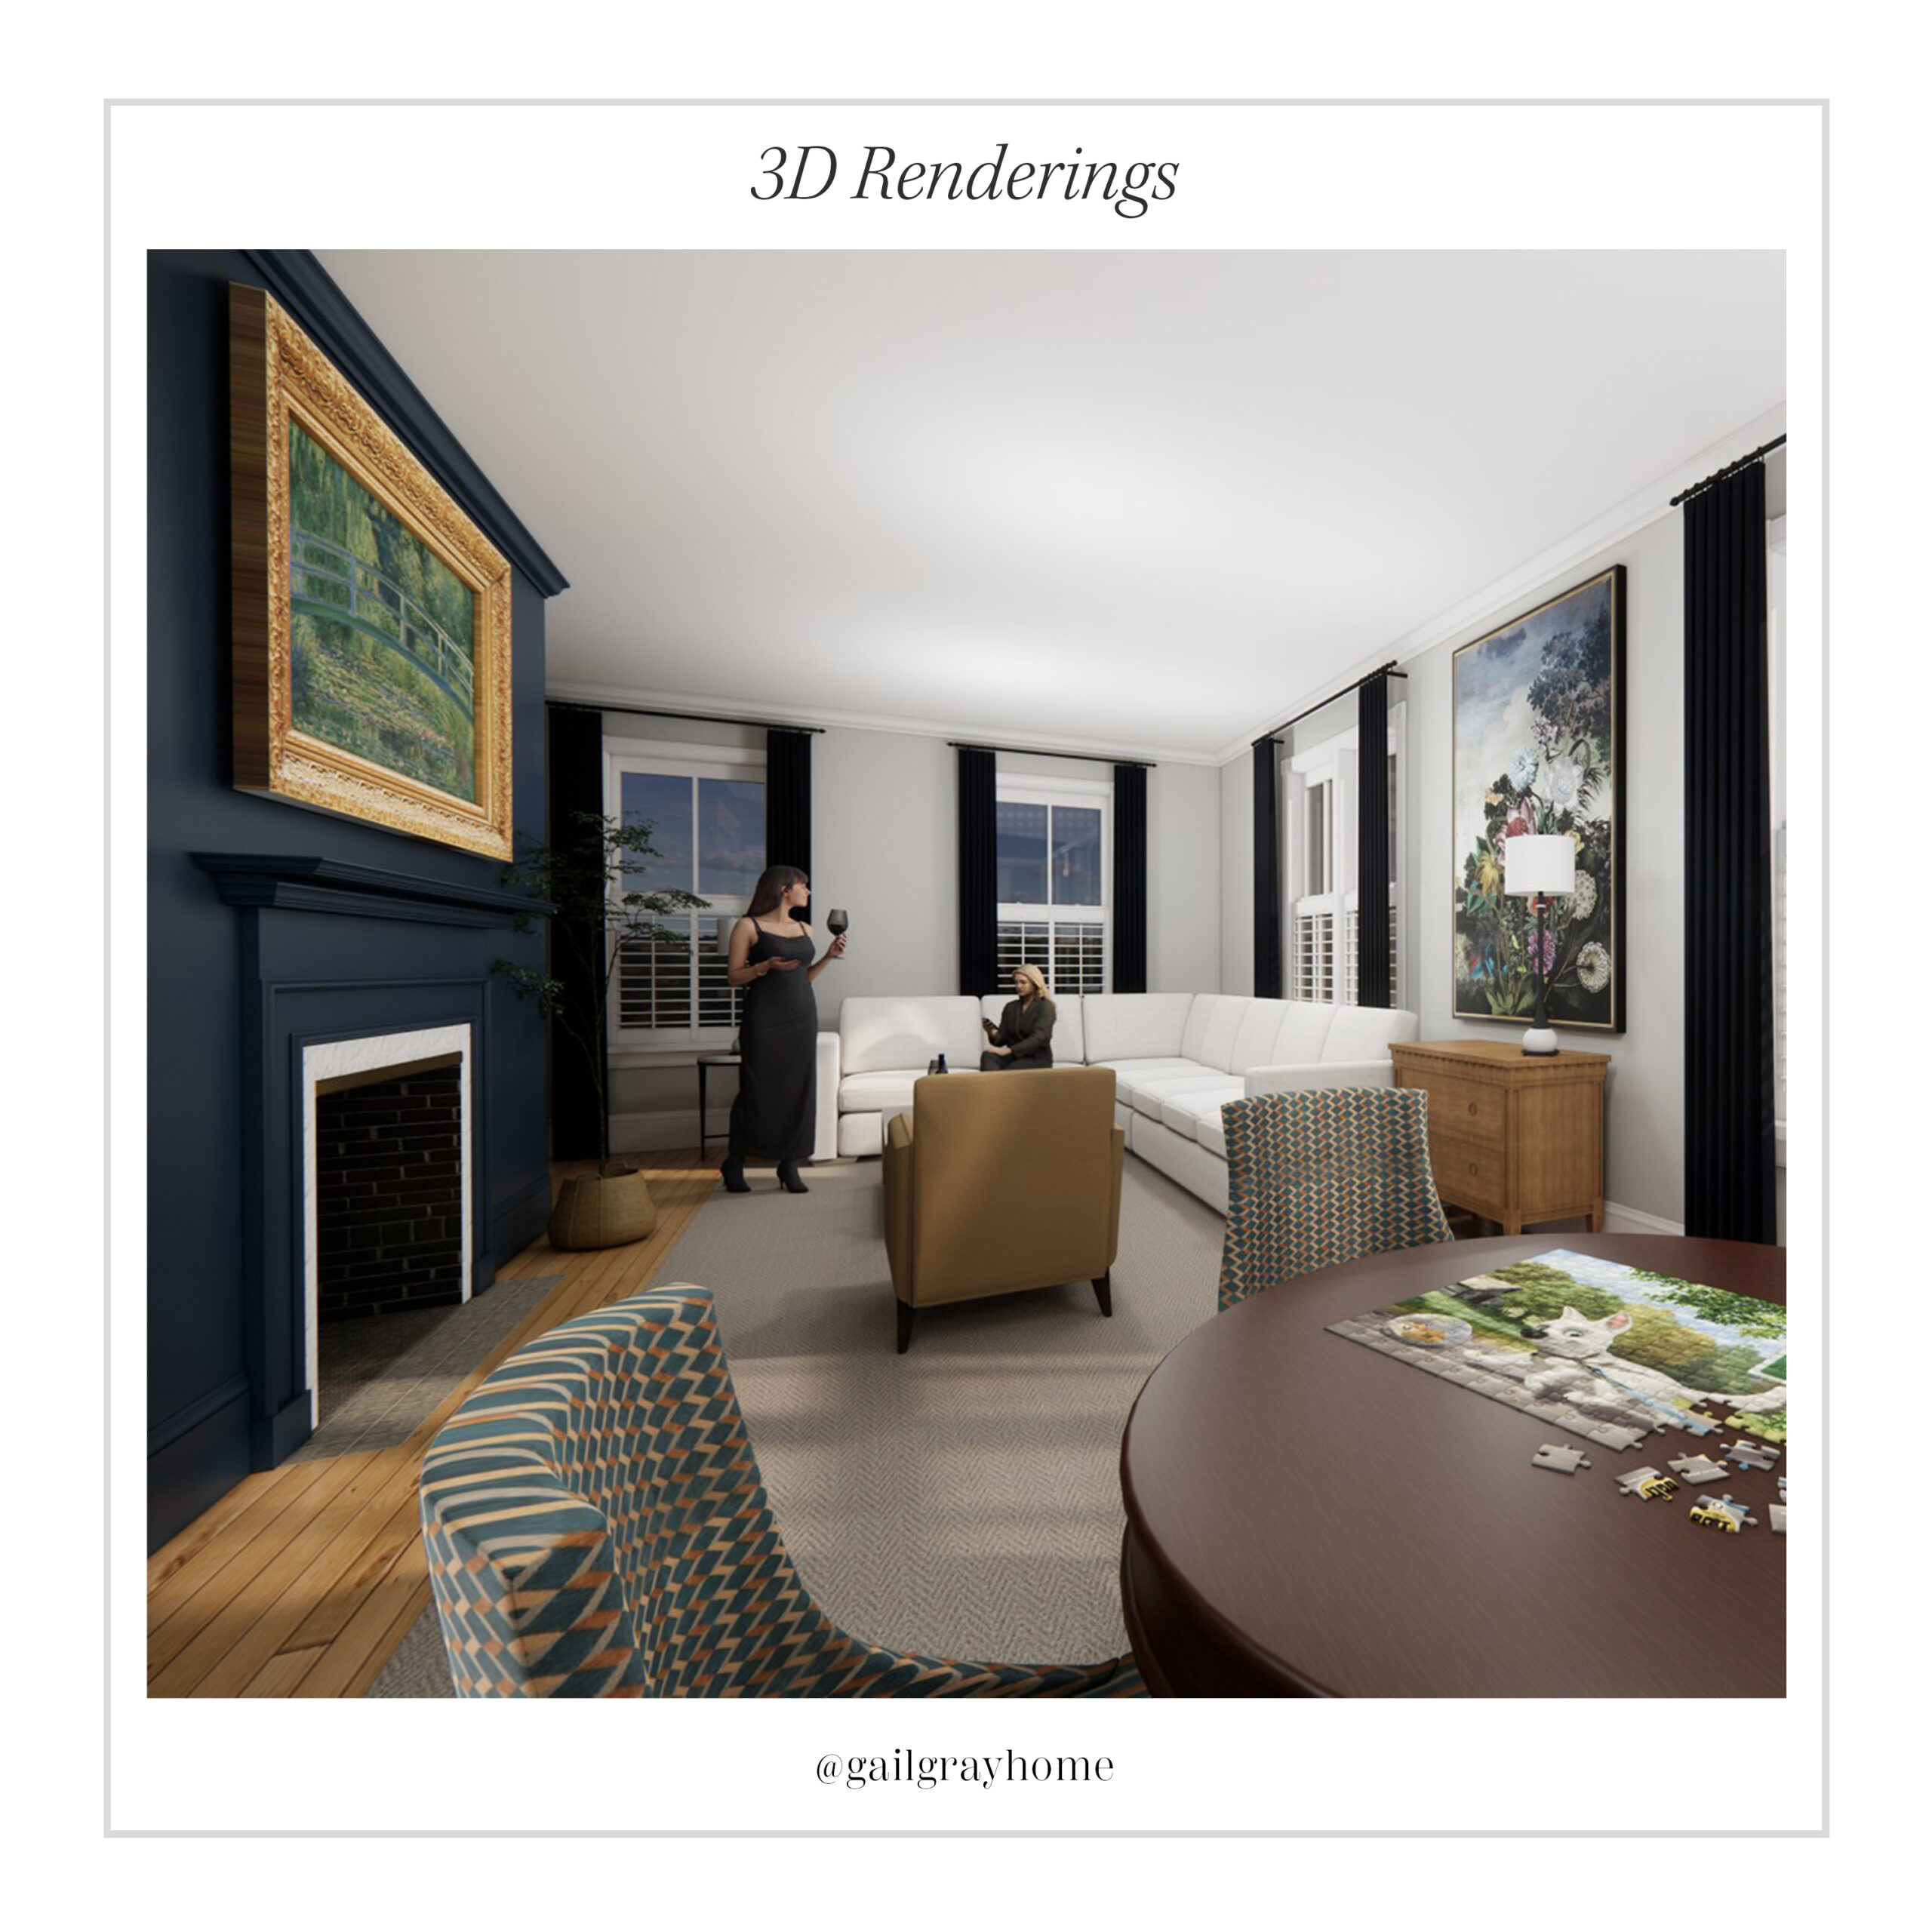 3D Renderings Design Services at GailGray Home